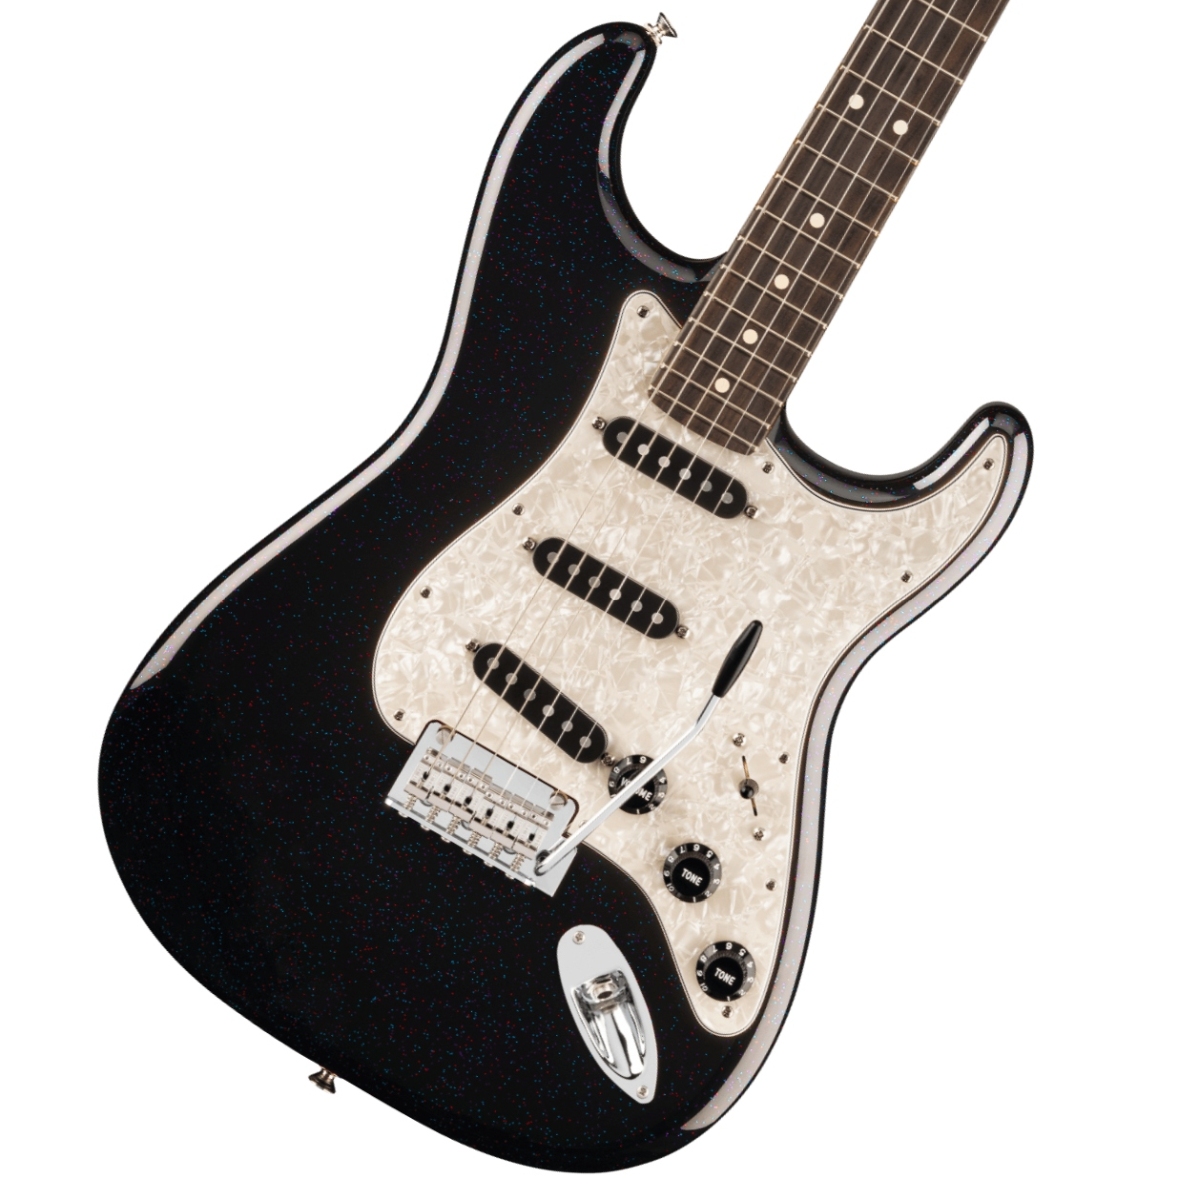 70th Anniversary Player Stratocaster,Rosewood Fingerboard, Nebula Noir